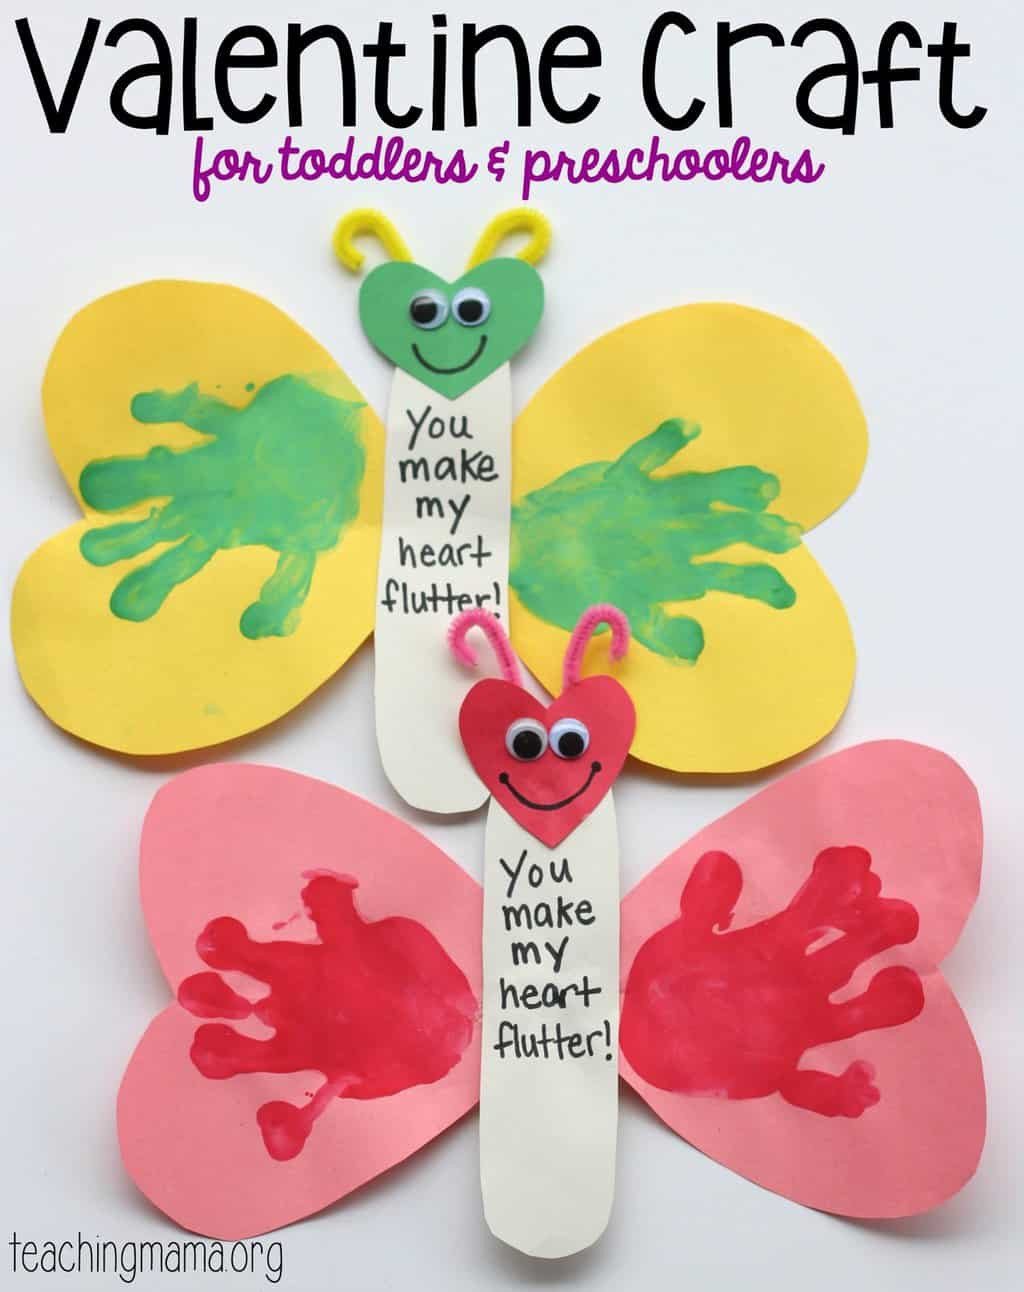 Easy Valentine Crafts For Preschoolers
 13 Creative Valentine s Day Crafts for Kids SoCal Field